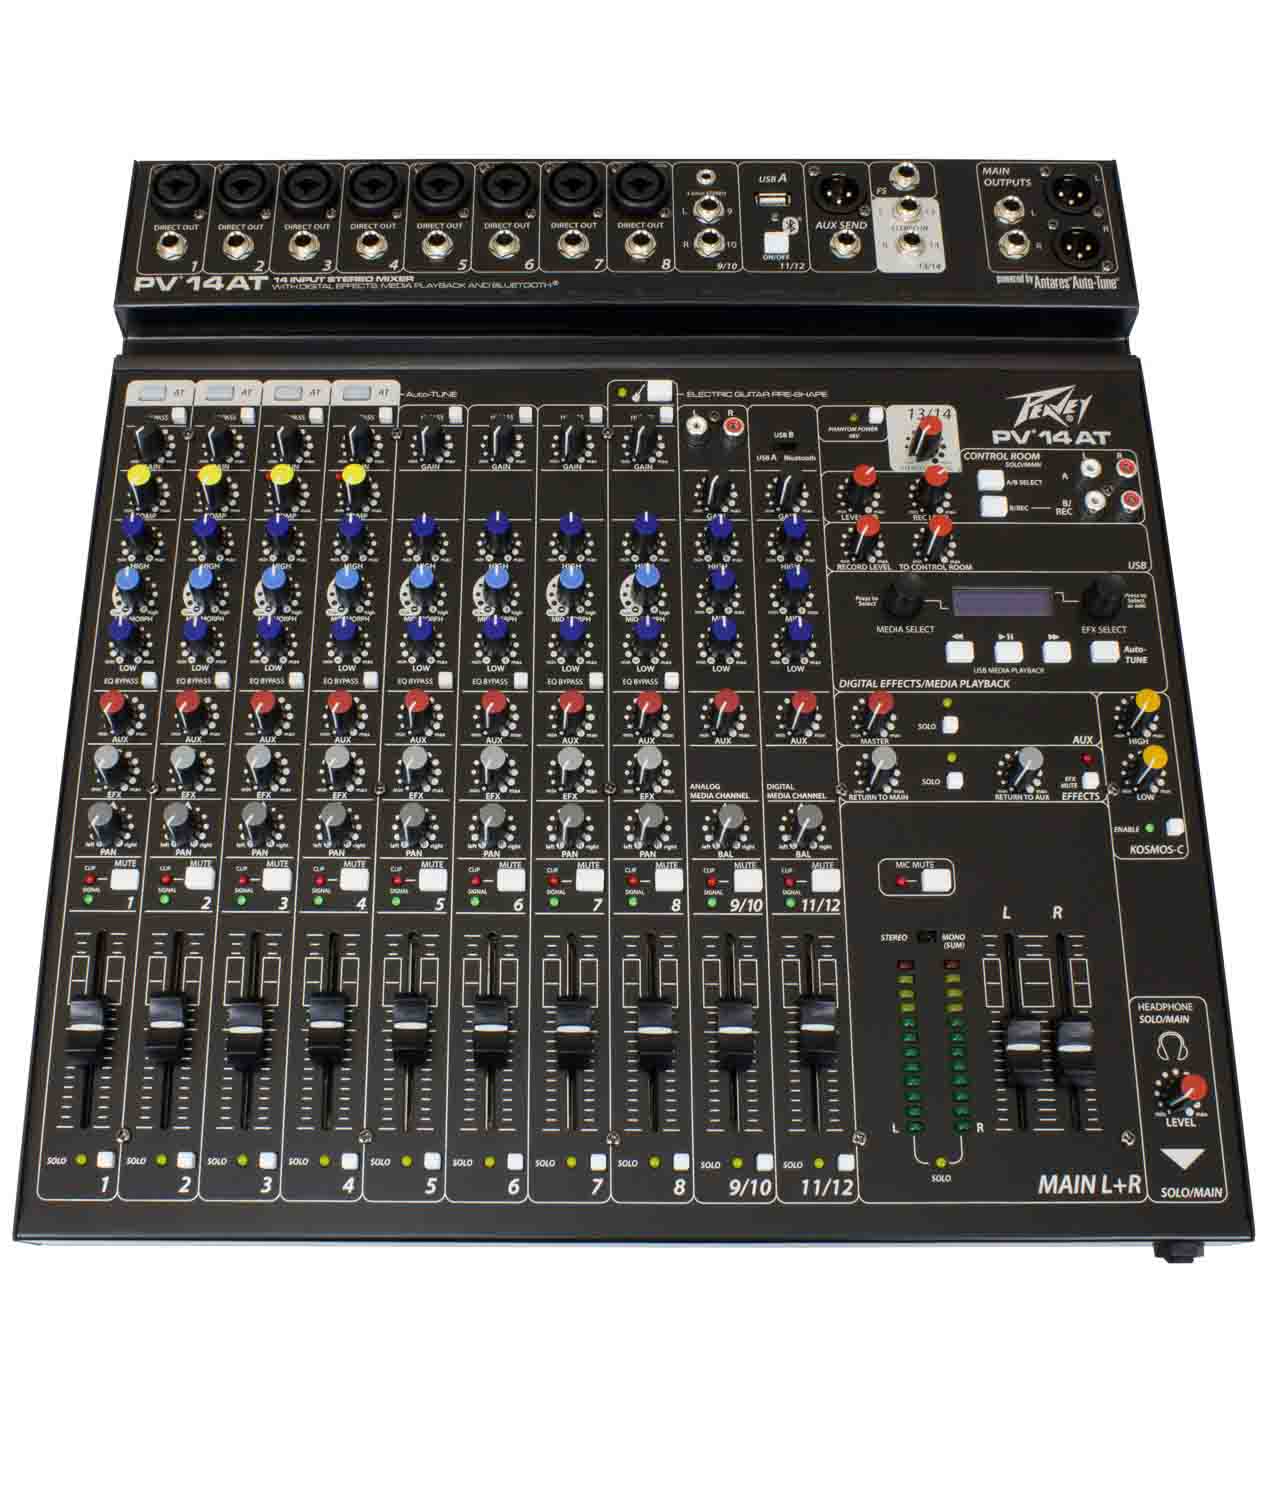 Peavey PV 14 AT, 14 Channel Compact Mixer with Bluetooth and Antares Auto-Tune - Hollywood DJ